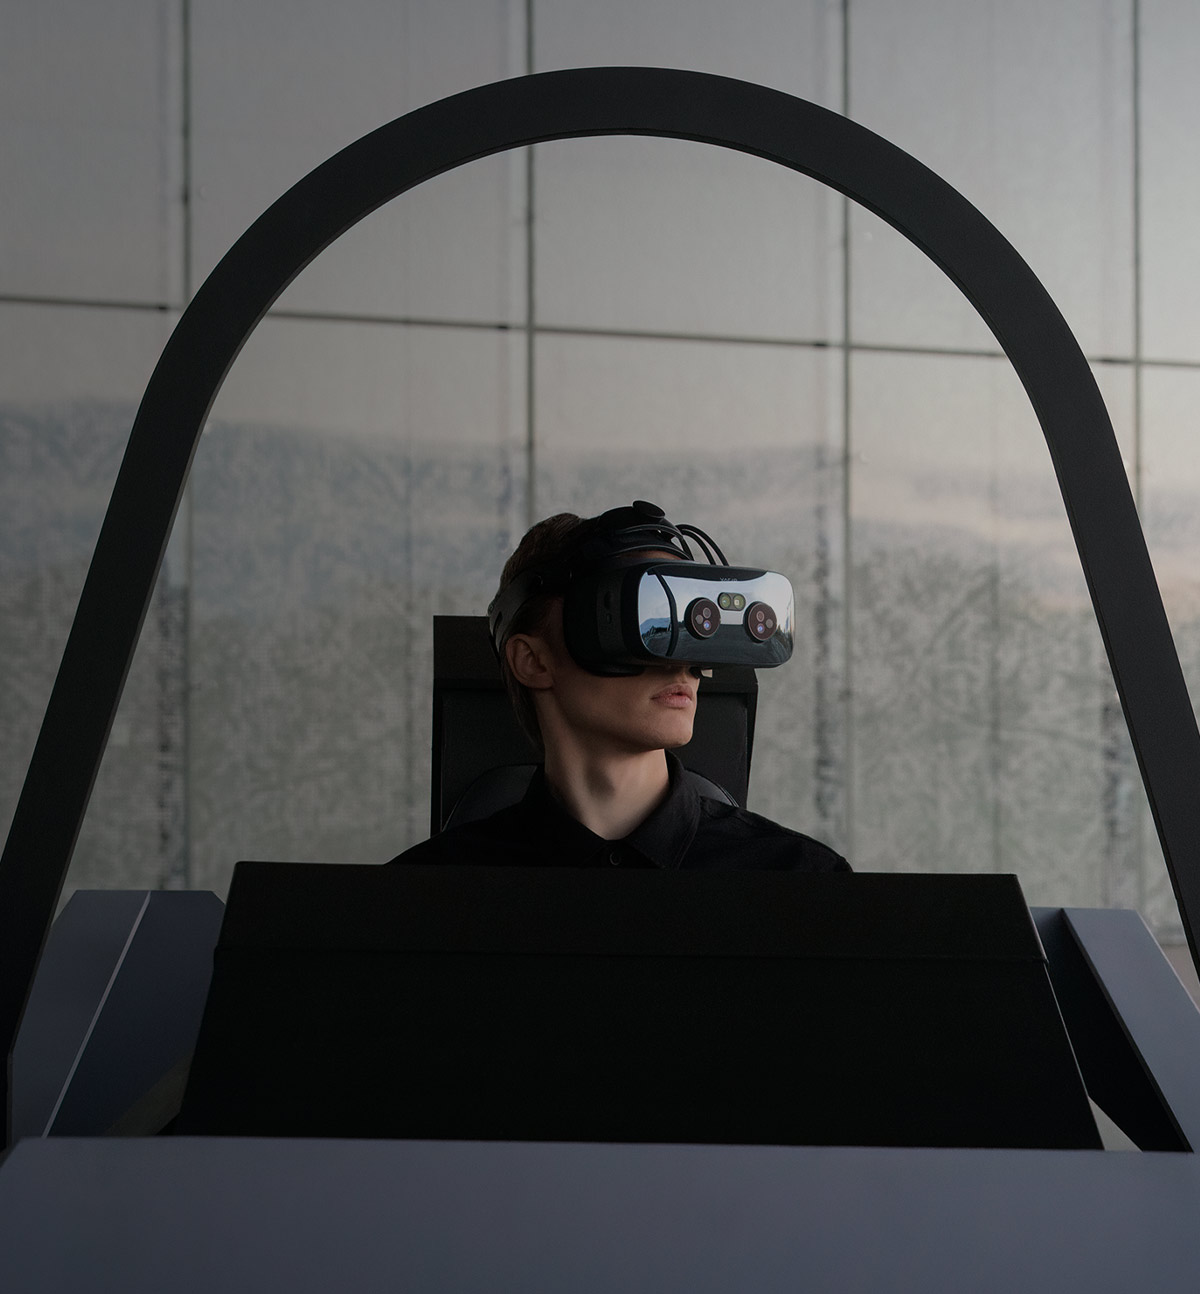 Varjo: Reduce the cost of training with immersive virtual reality (VR), augmented reality (AR) or mixed reality (MR/XR) environments to replace or supplement traditional training solutions.